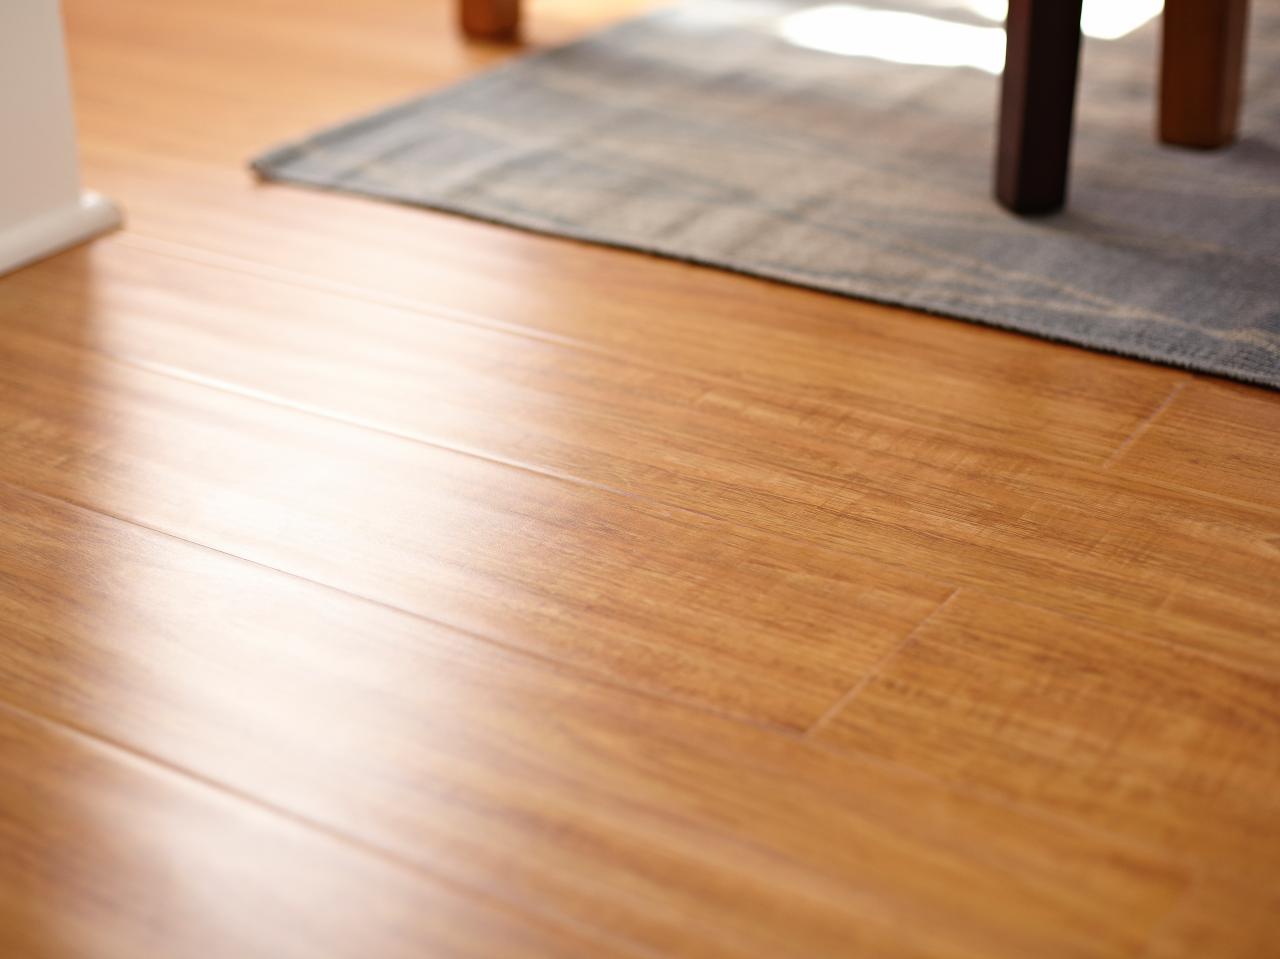 How to Clean and Maintain Laminate Floors | DIY